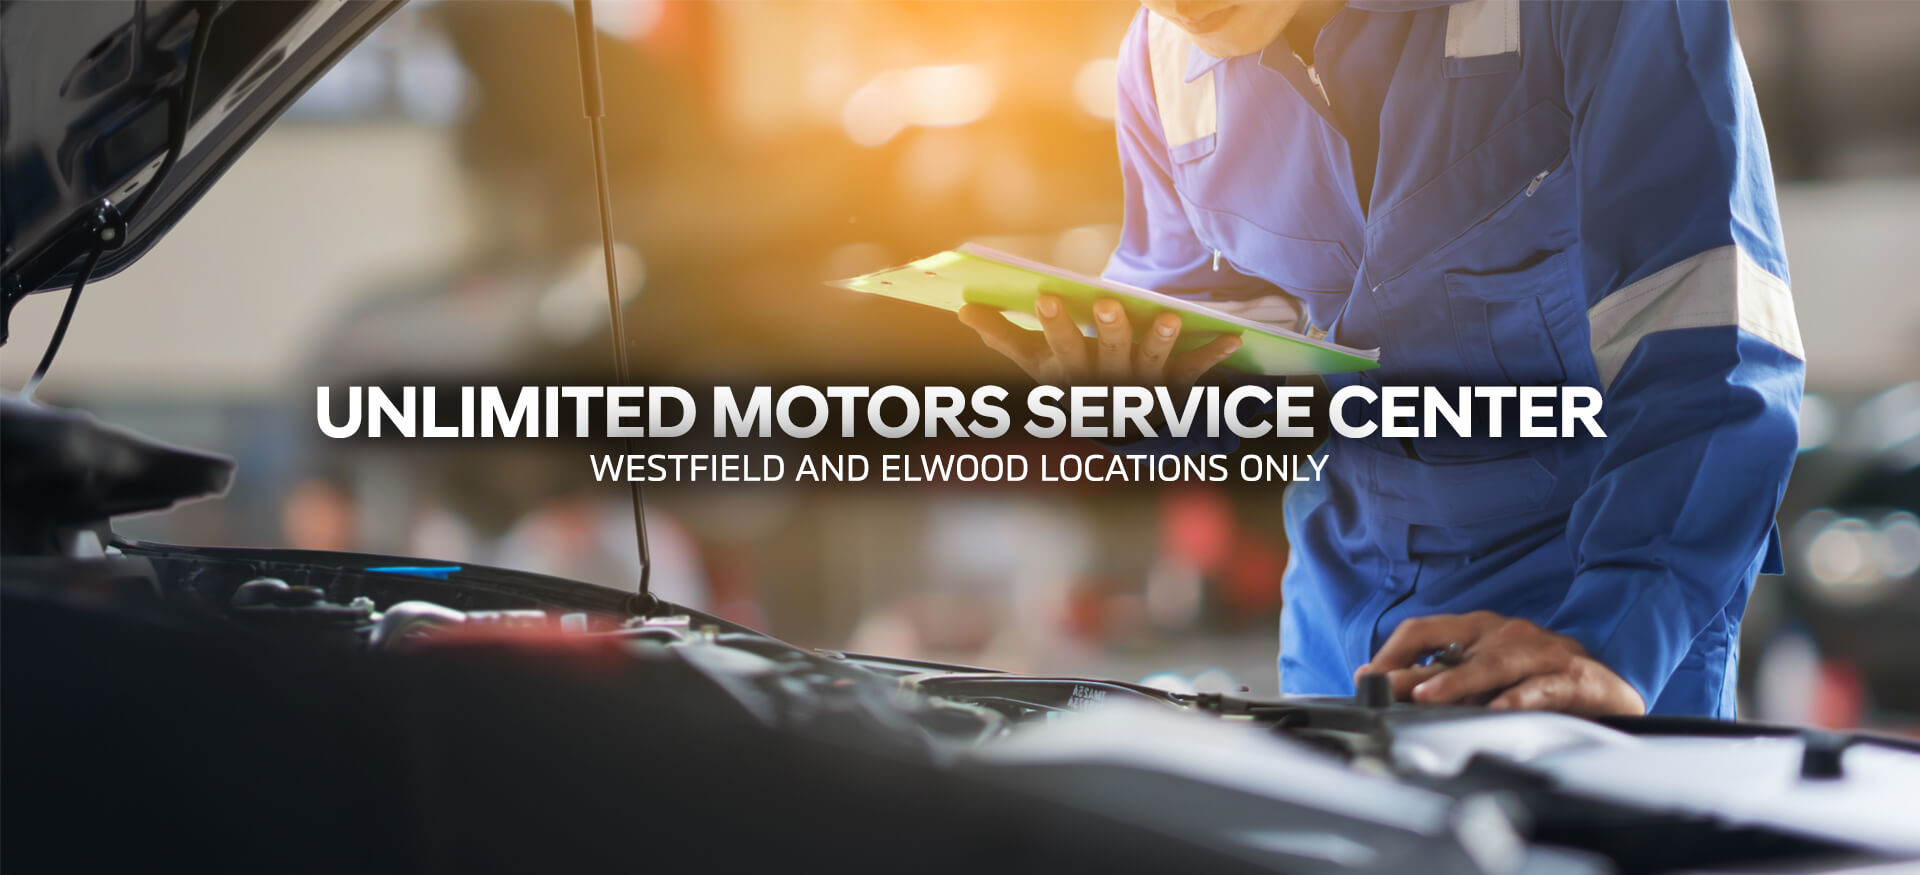 unlimited motors service center westfield and elwood locations only